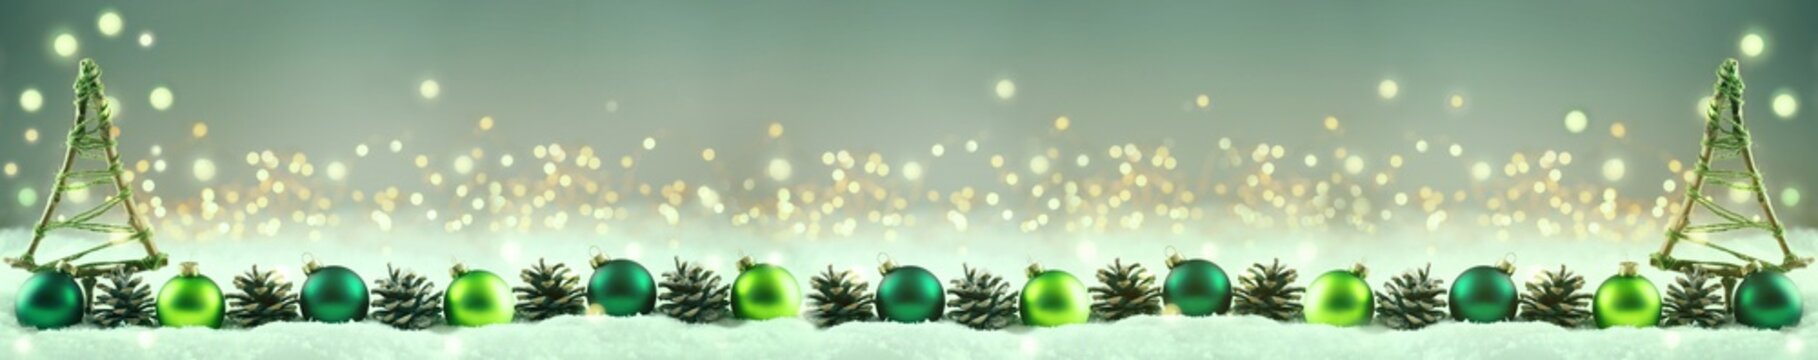 Abstract Christmas Background  -  Christmas decoration row in snow landscape  -   Pine cones, baubles and tree